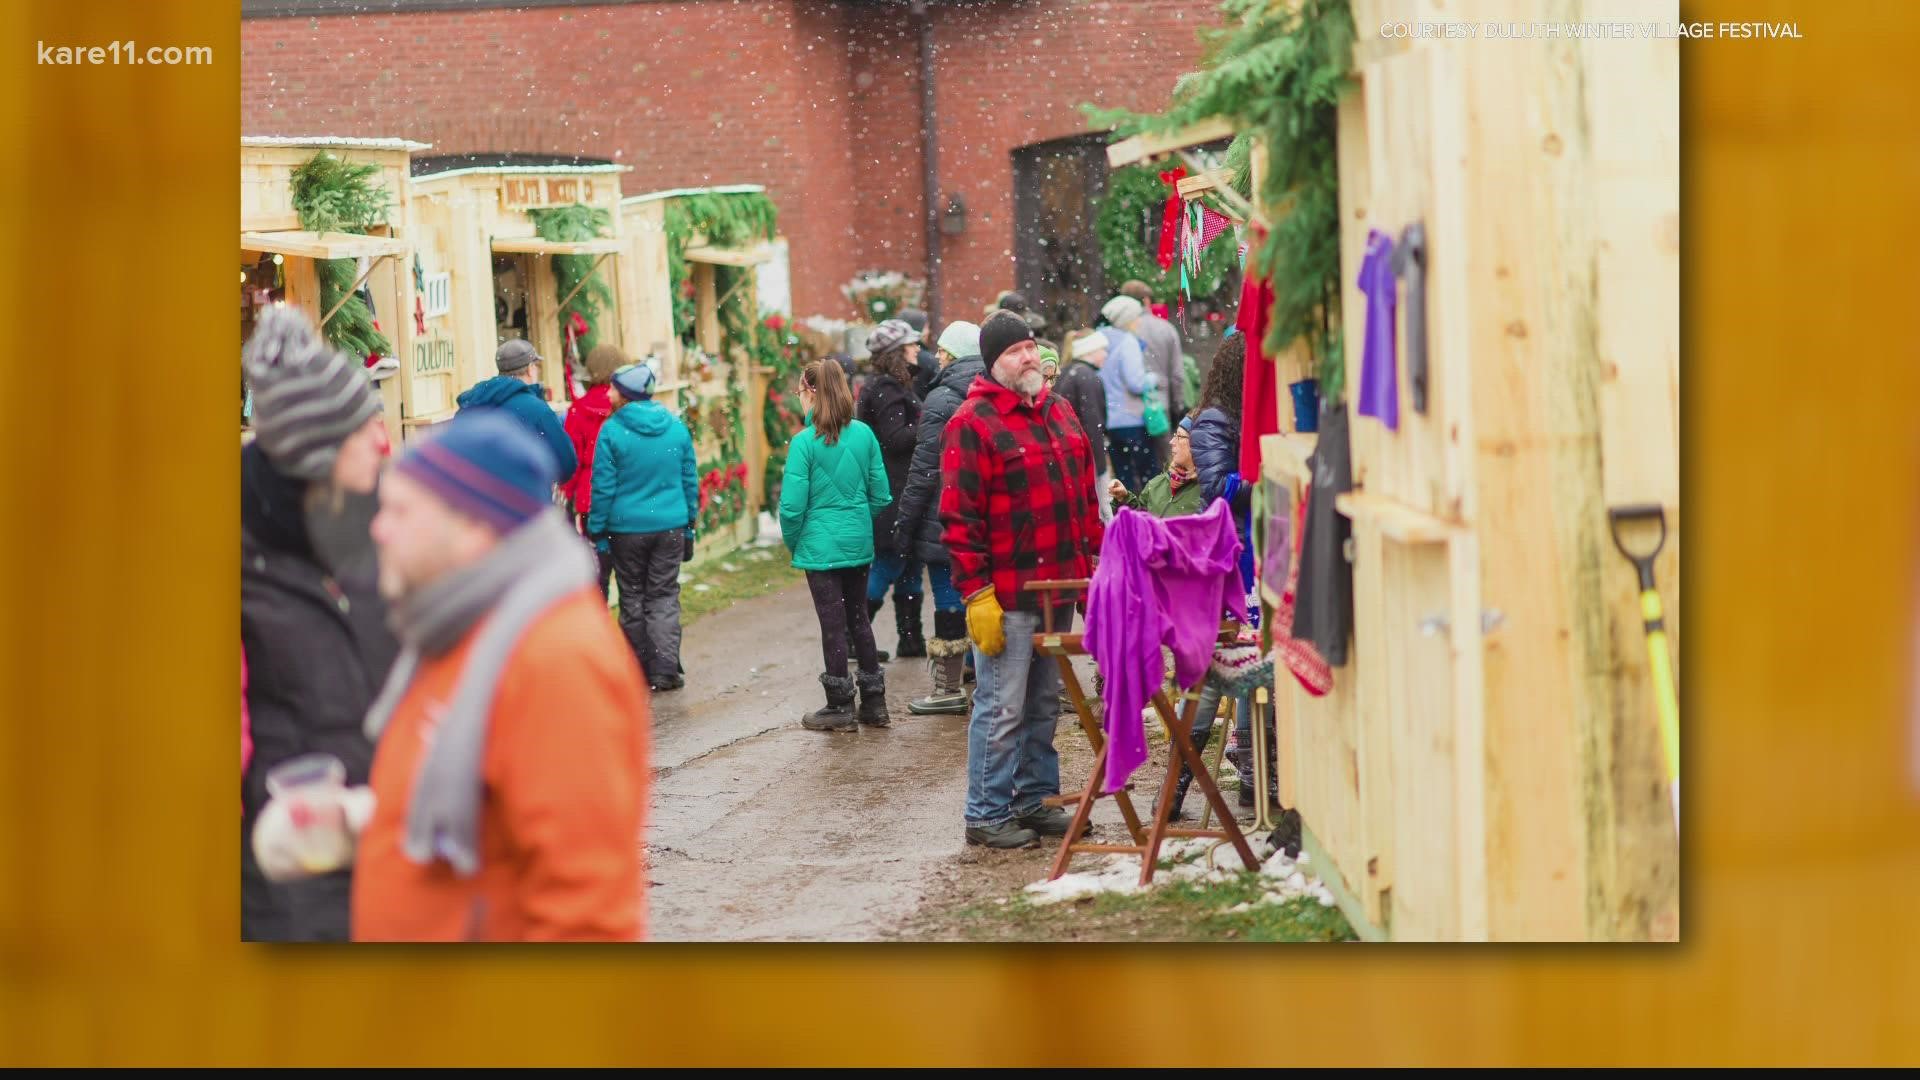 The annual two-day winter market will be held outside at the Duluth Entertainment Convention Center's Harbor Drive along Lake Superior.